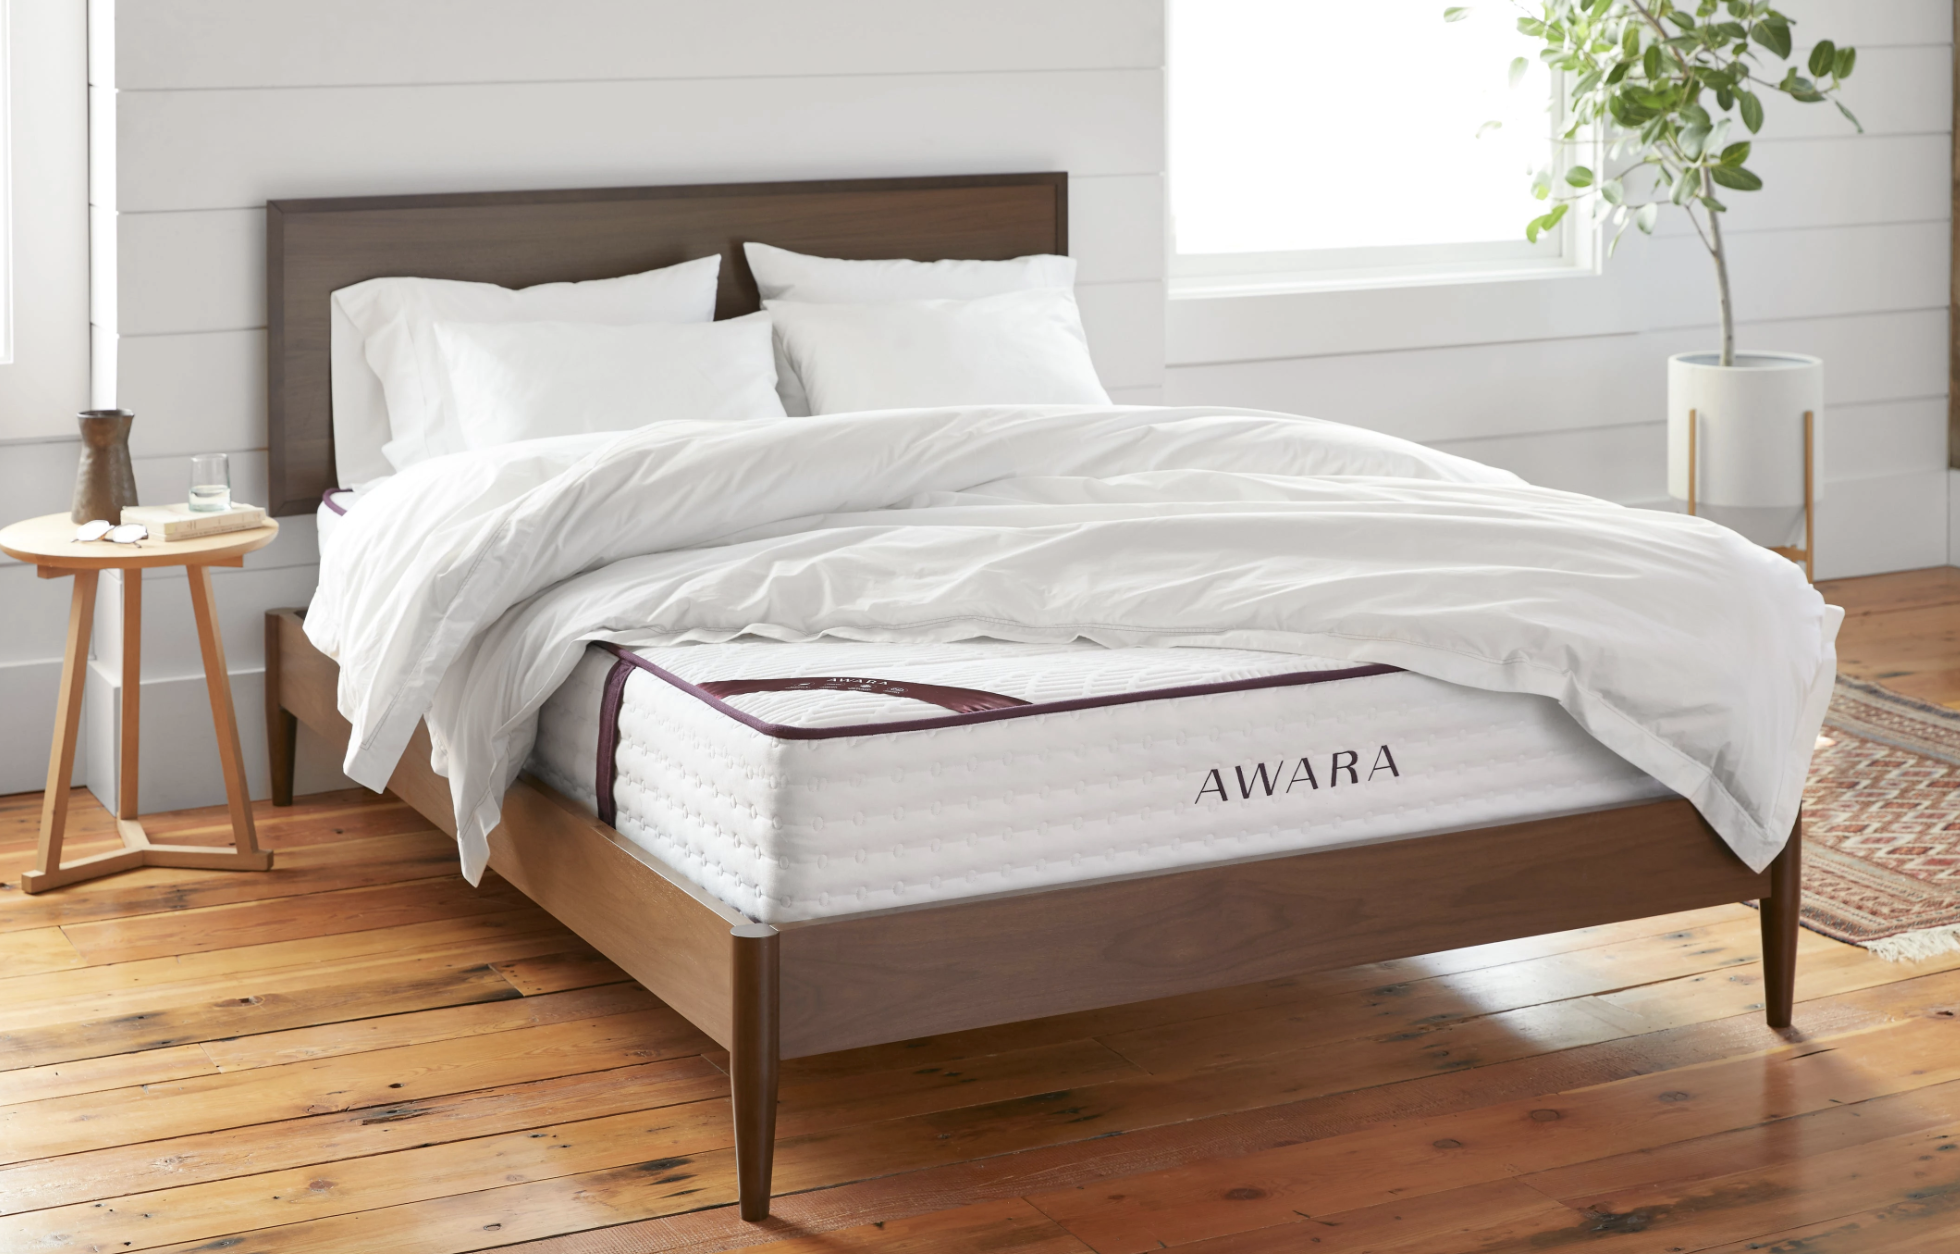 awara mattress on a bed frame with accessories on top